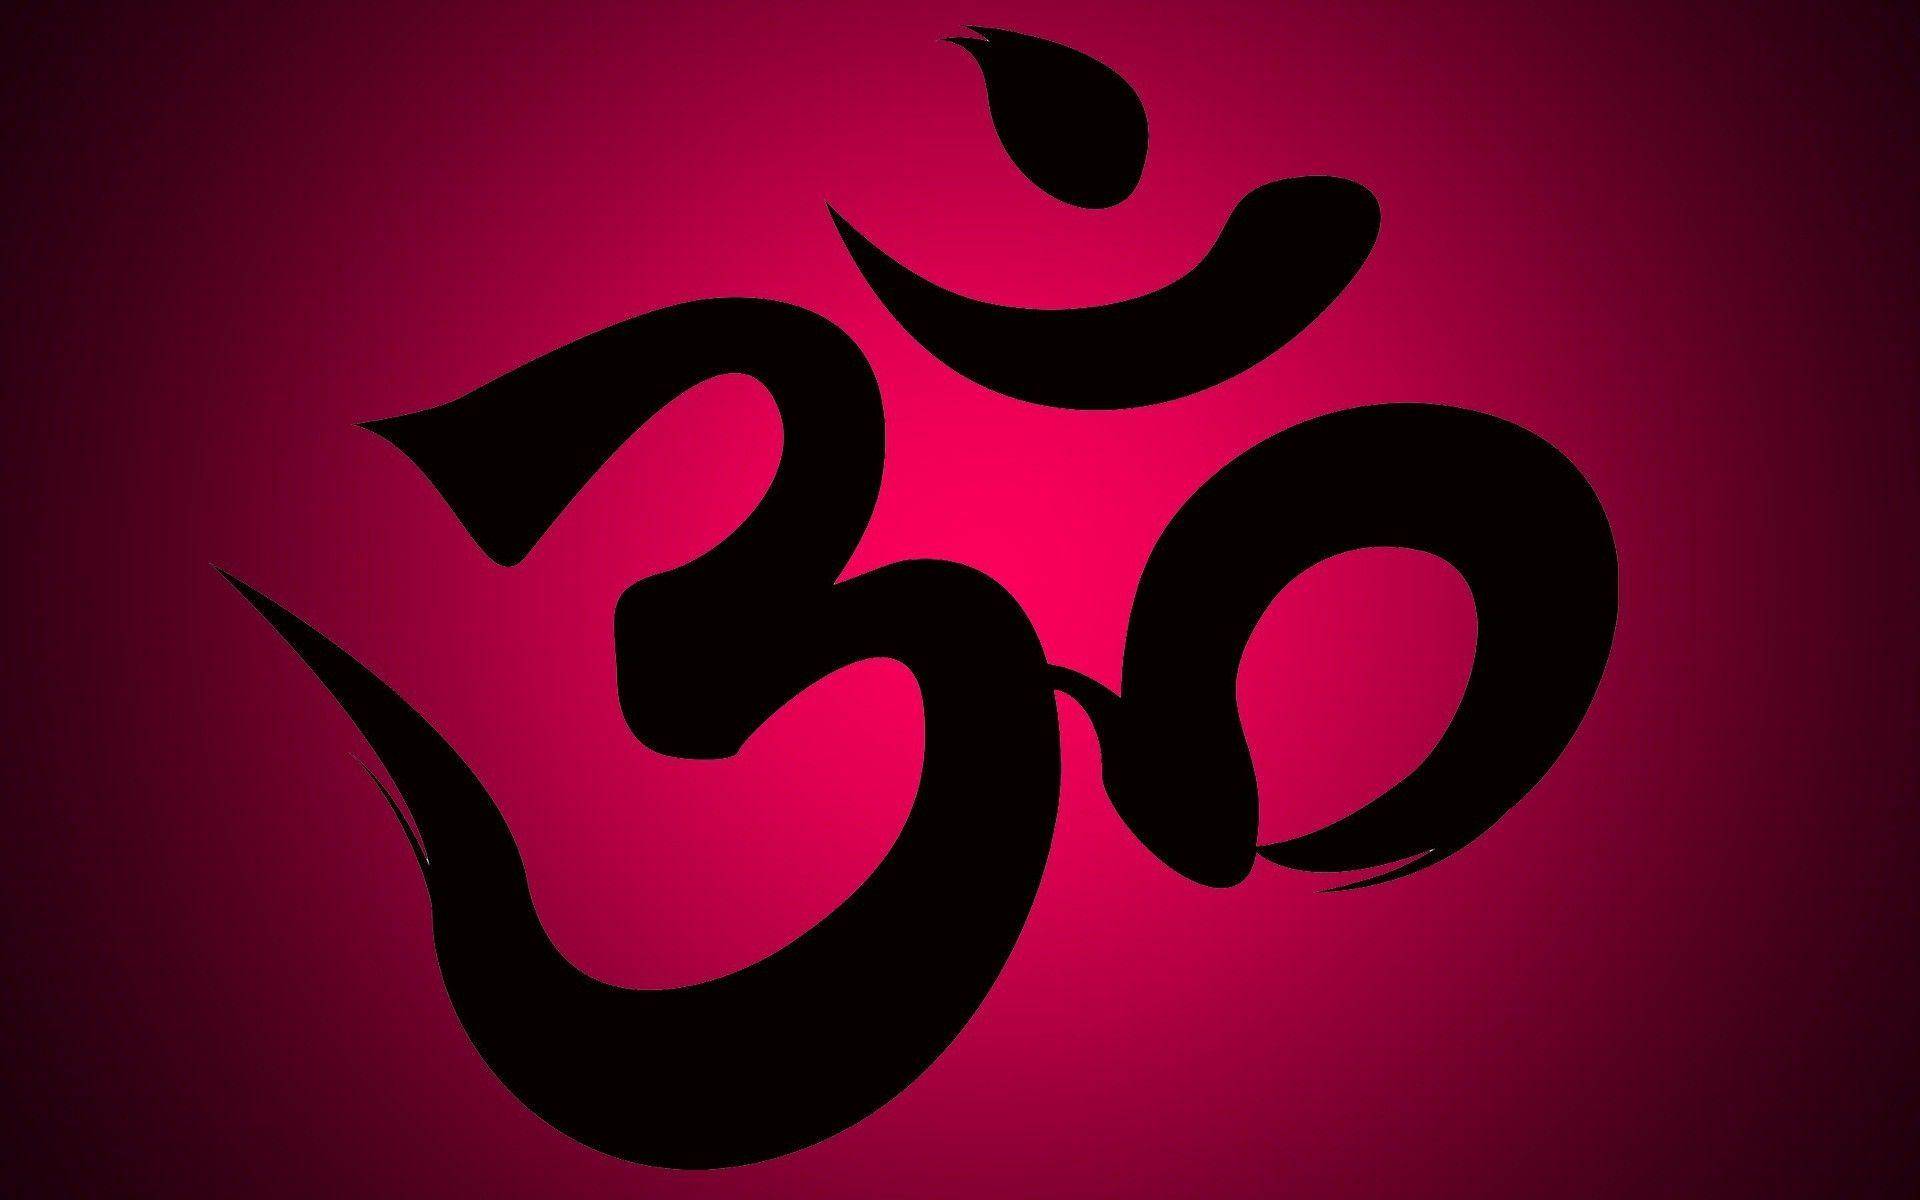 Ohm Symbol Wallpapers - Top Free Ohm